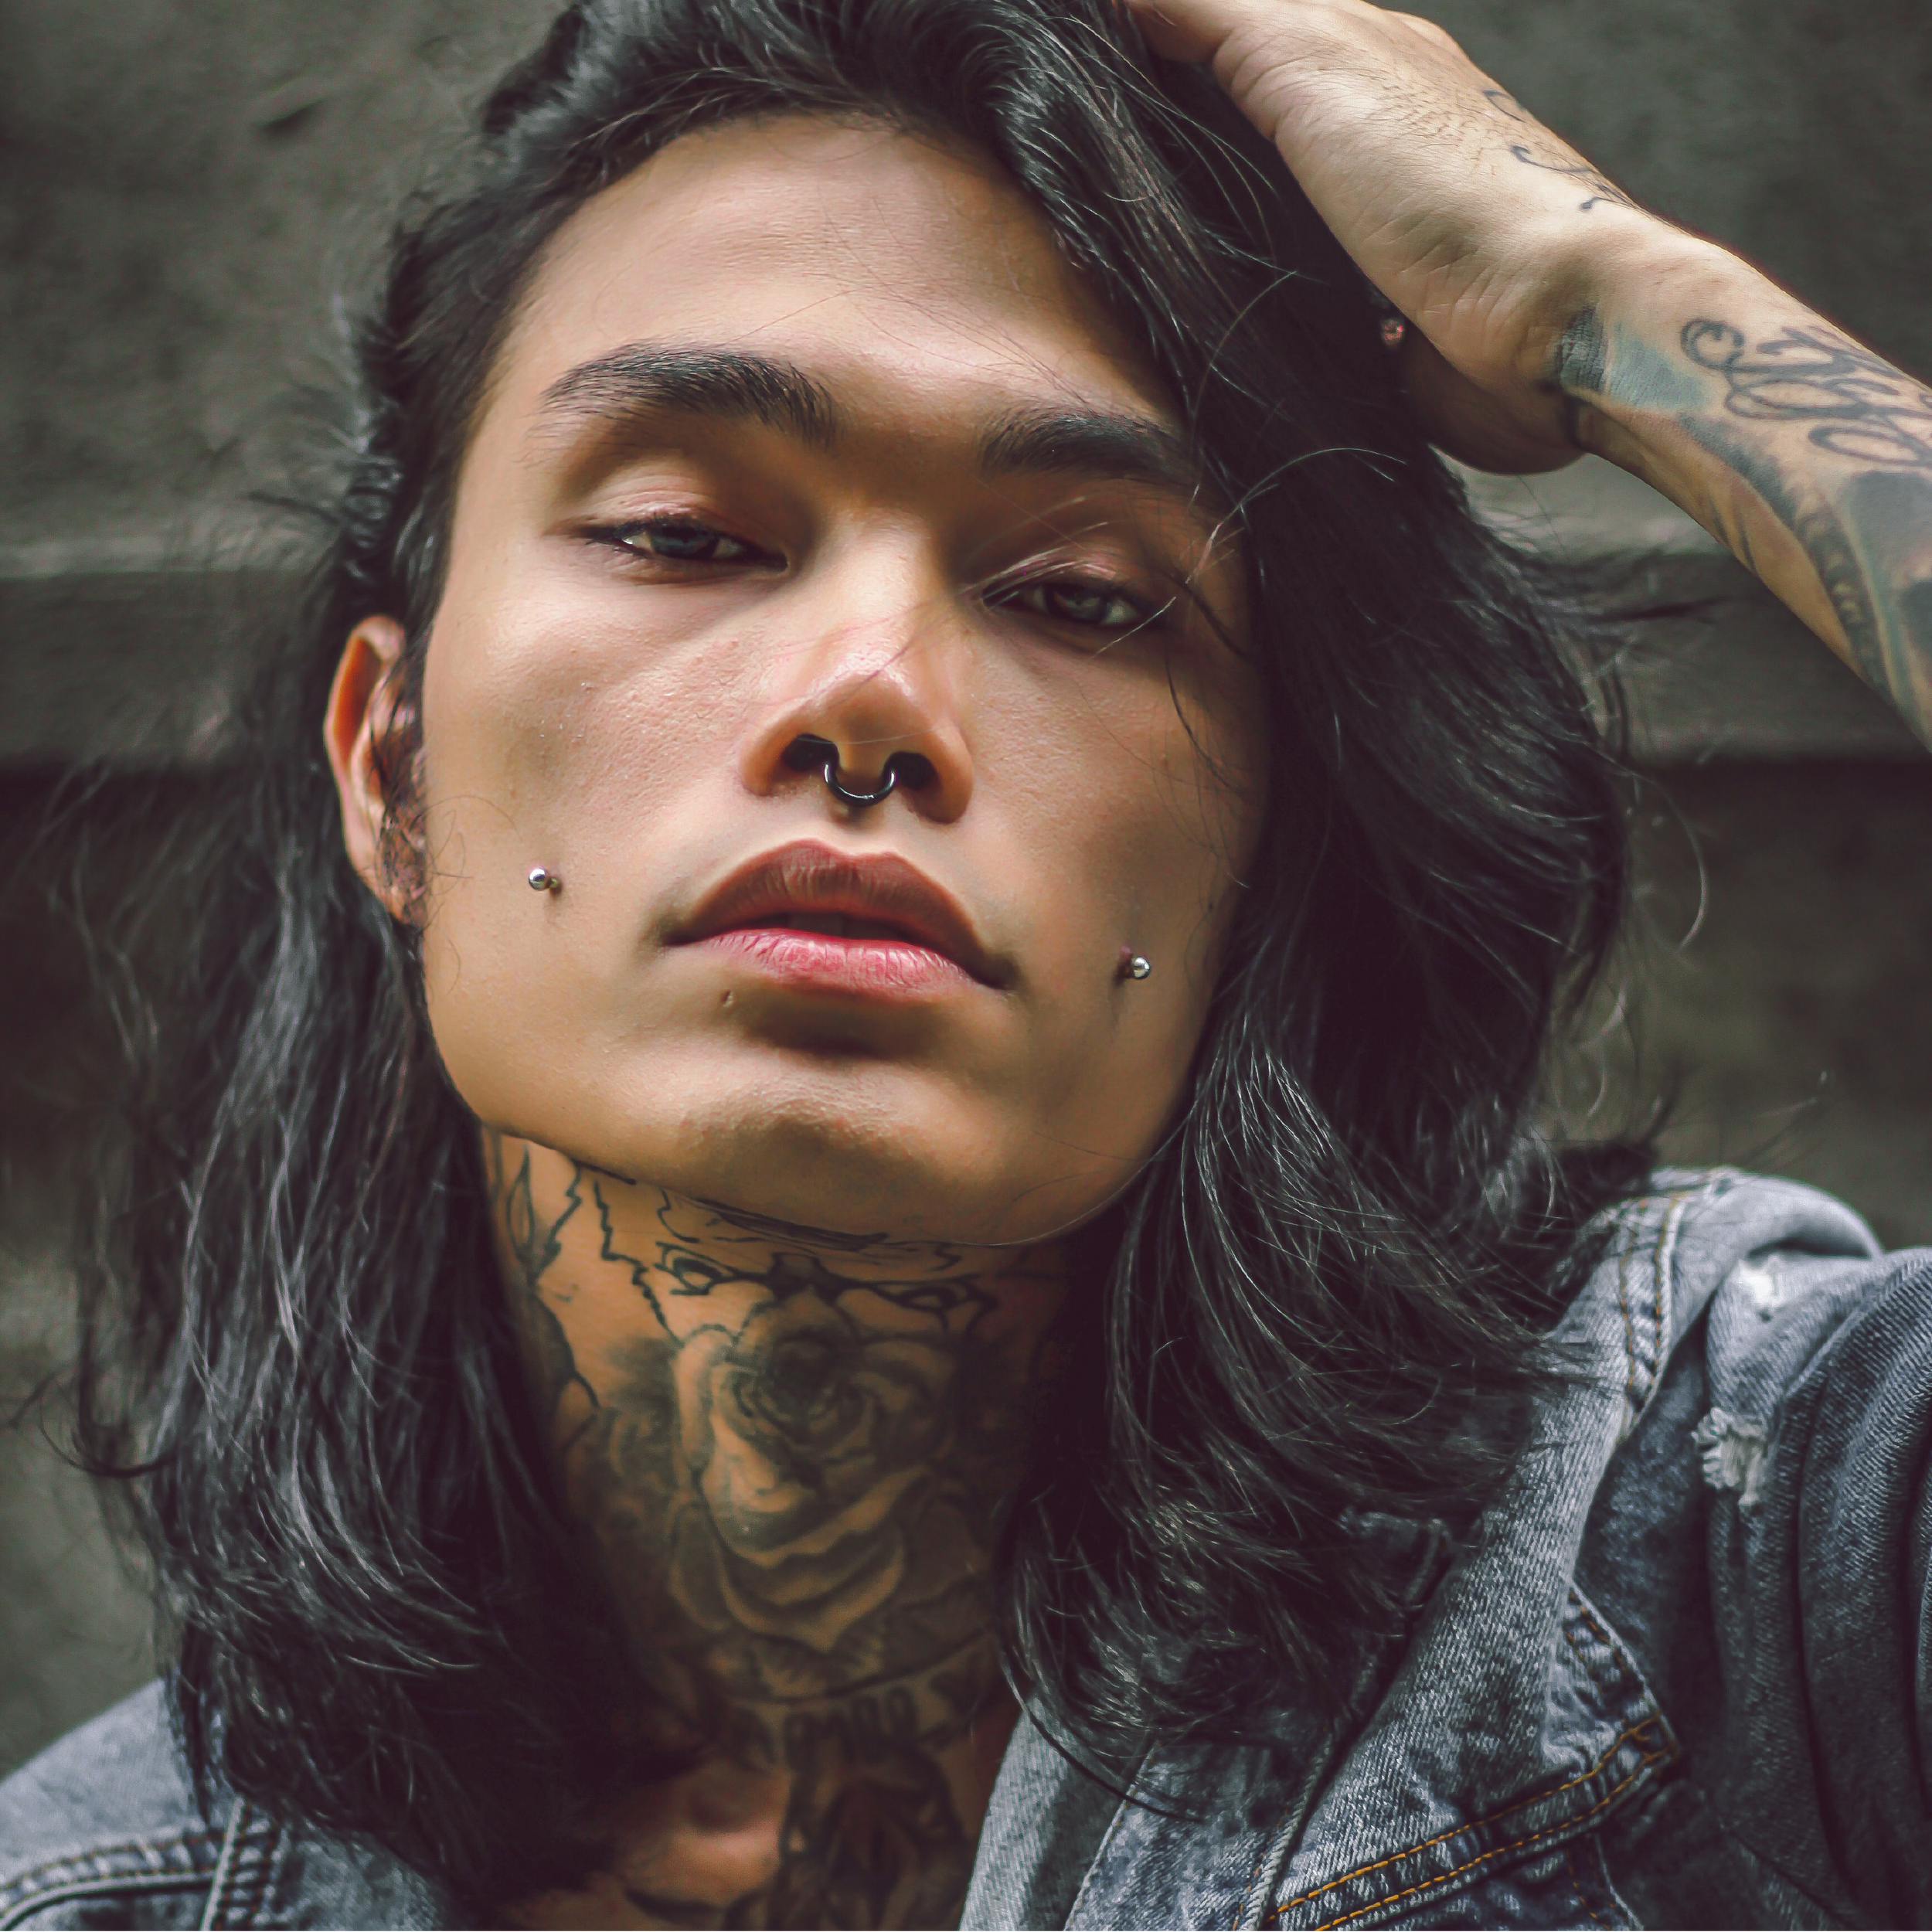 Piercings for Men Guide 11 Tips for a GreatLooking Piercing  GQ